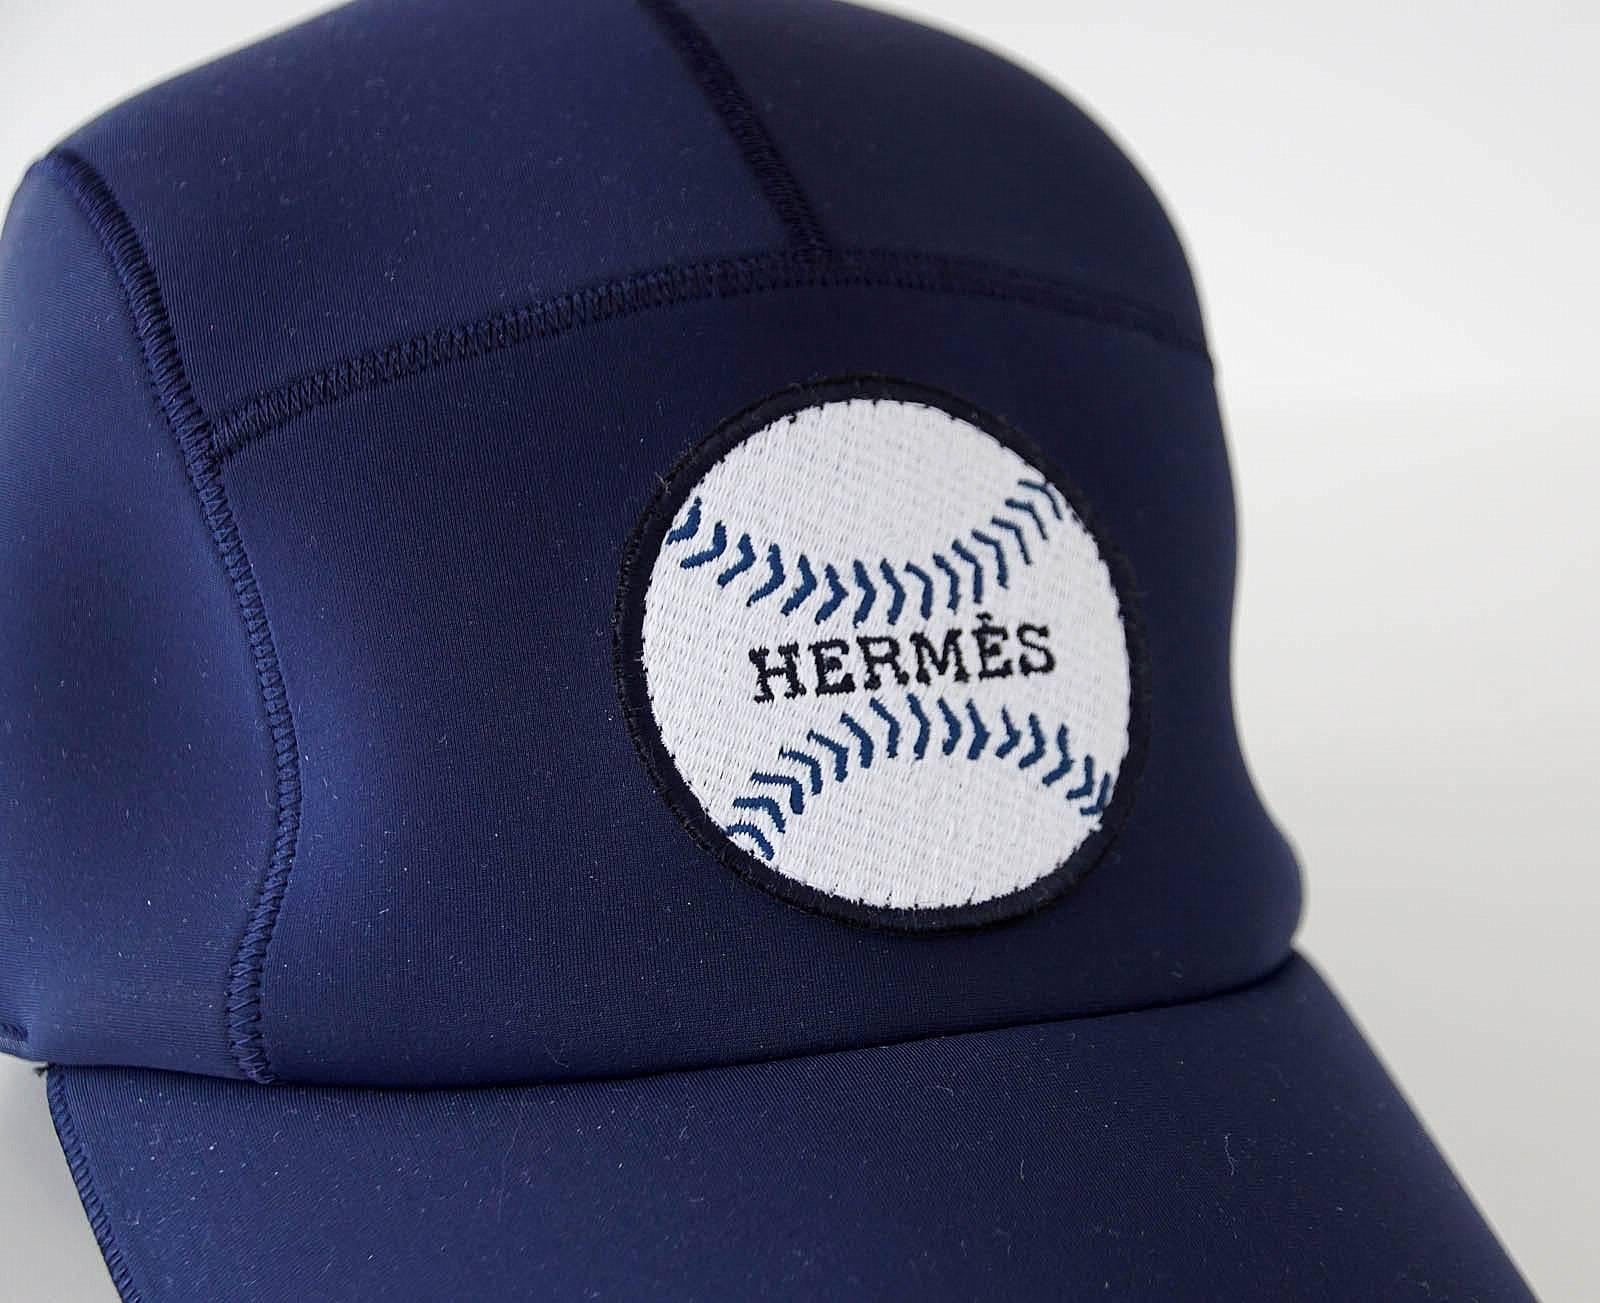 Guaranteed authentic Hermes Limited Edition Sold Out navy blue Baseball cap.  
The cap shows a white Baseball with navy stitching and HERMES written across the center.
2 HERMES PARIS Clou de Selle snaps at rear. 
NEW or NEVER WORN
2 identical caps